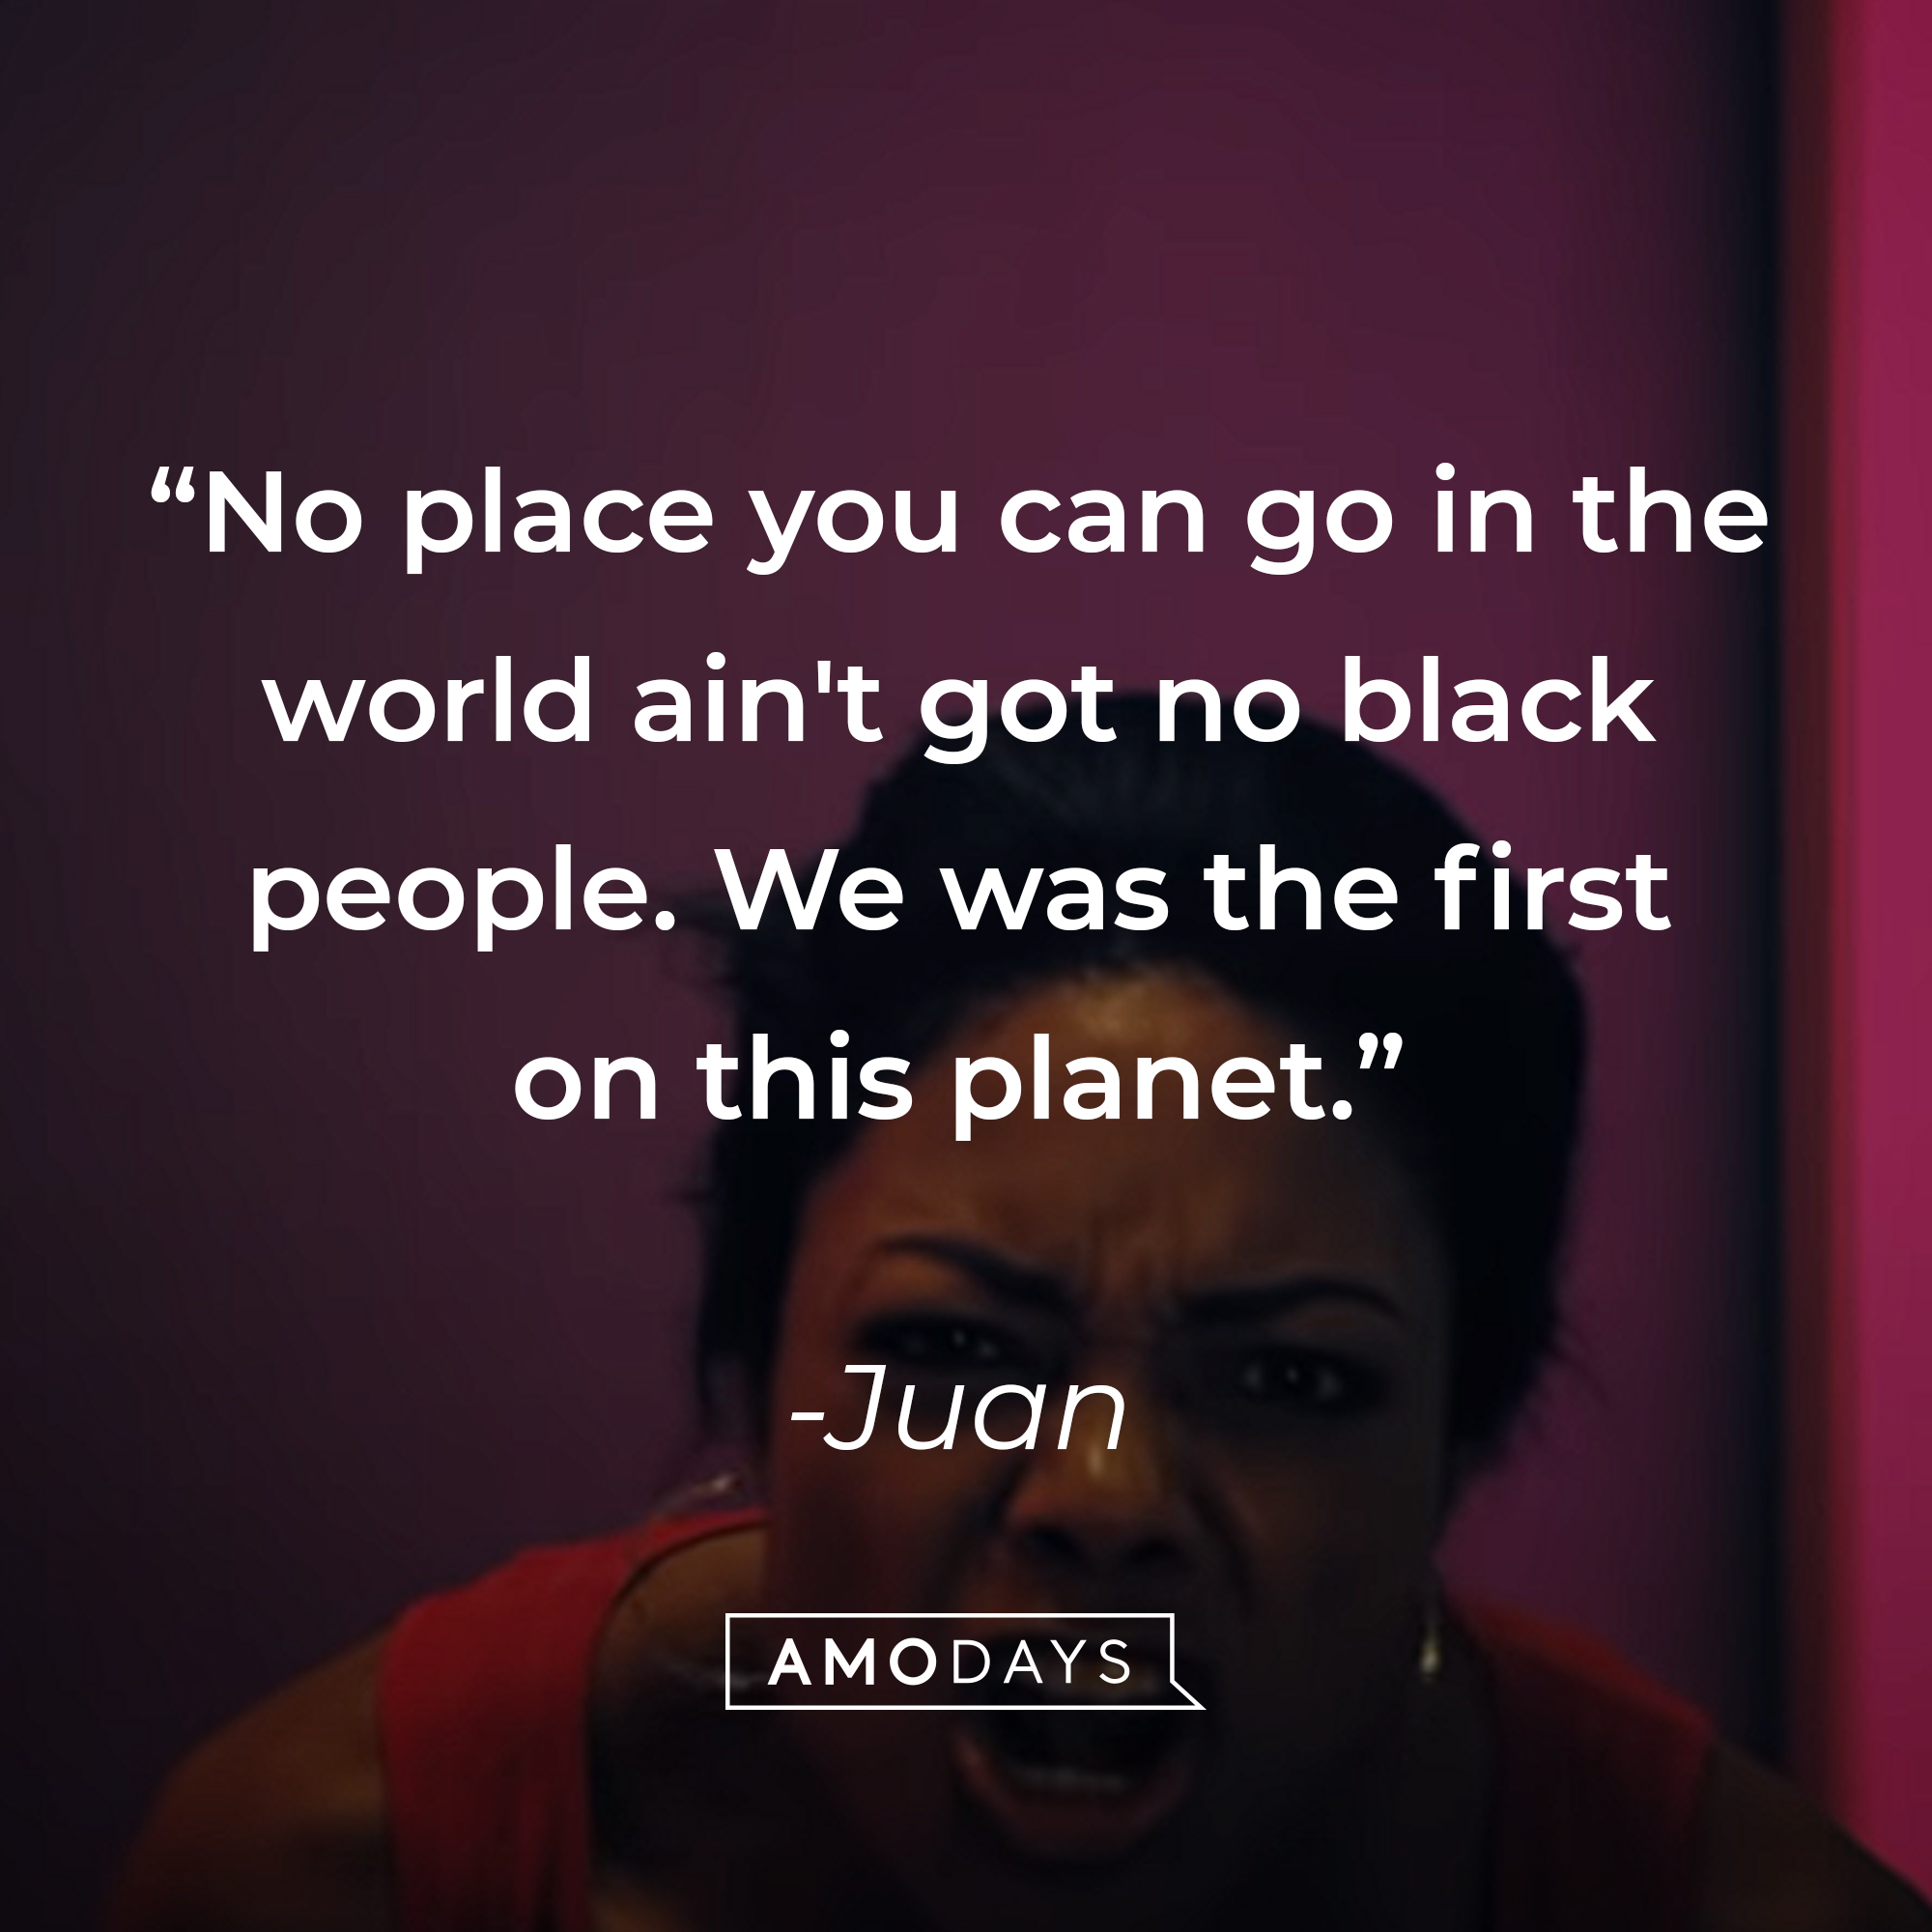 An image of Paula with Juan’s quote: .No place you can go in the world ain't got no black people. We was the first on this planet.” | Source: youtube.com/A24